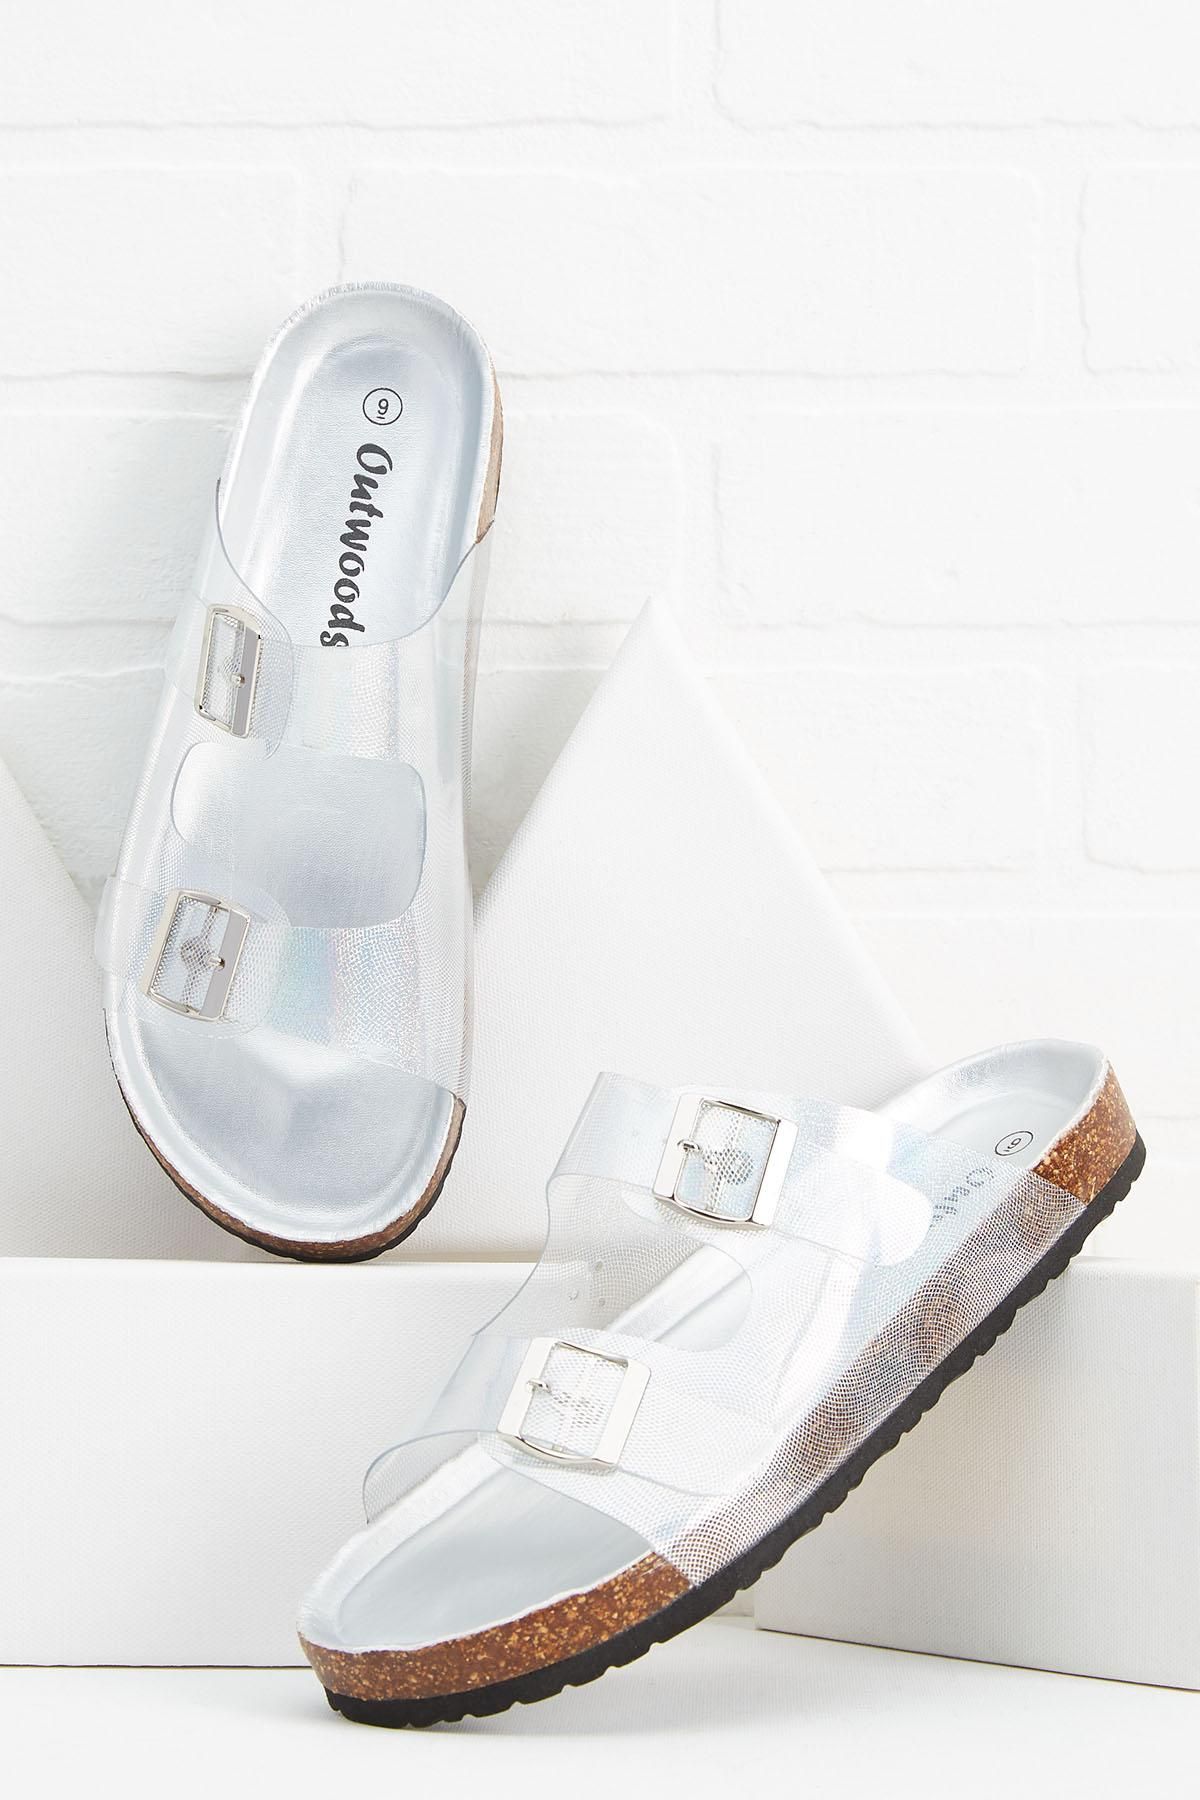 see clearly now sandals | Versona